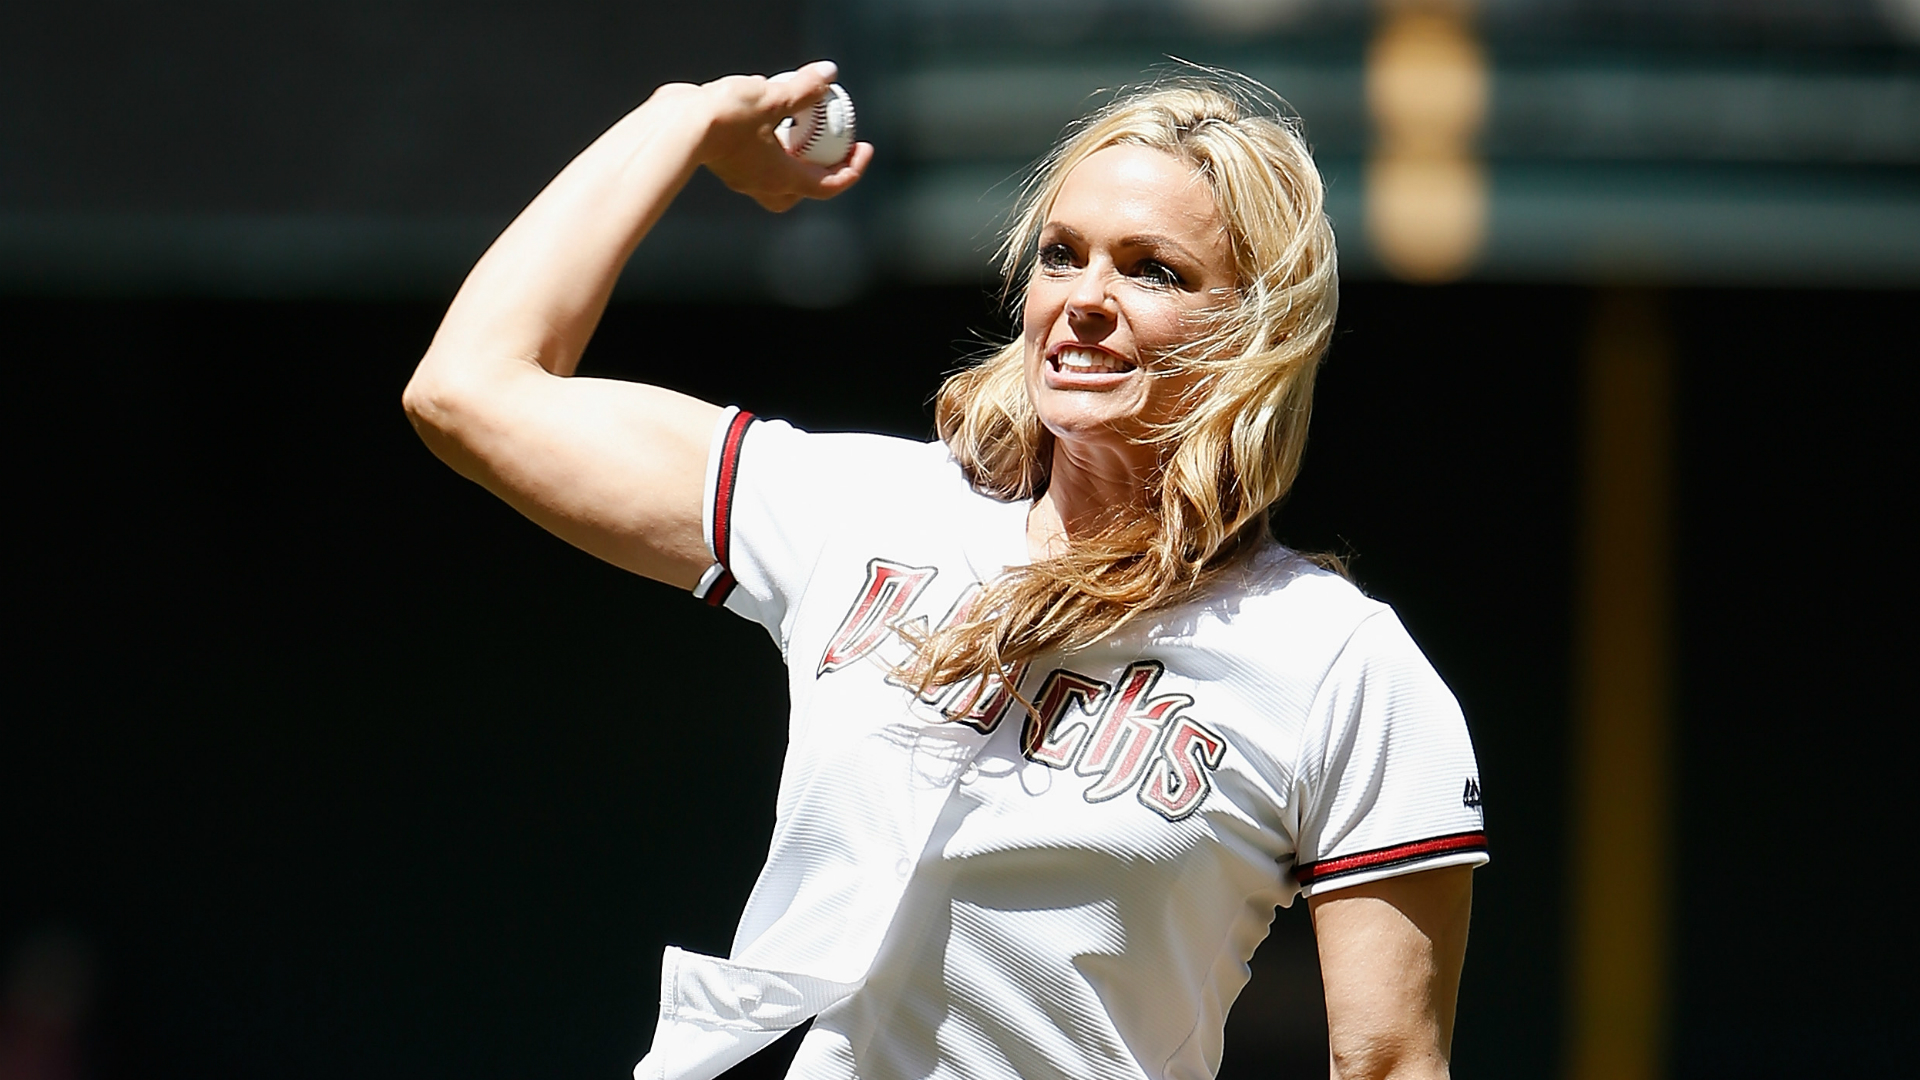 Jennie Finch the first woman to manage a pro baseball team